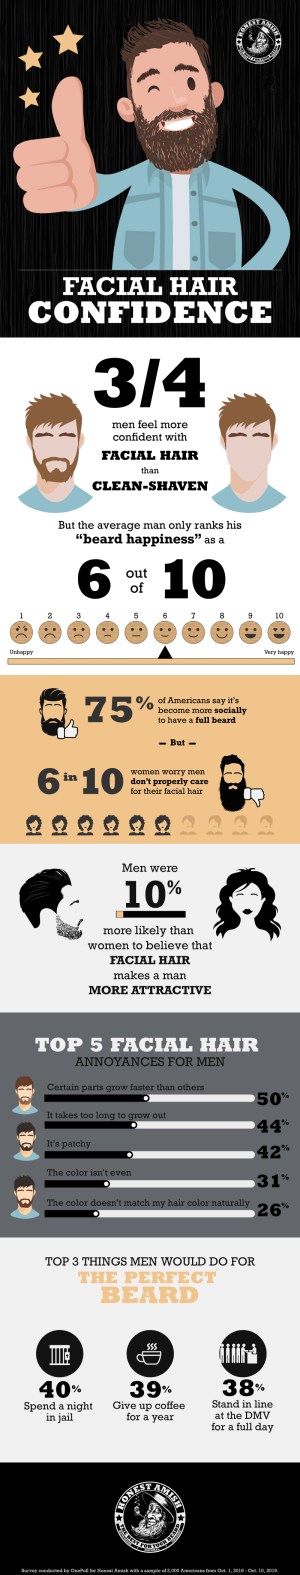 Three-quarters of American men say they feel more confident with facial hair, according to new research.